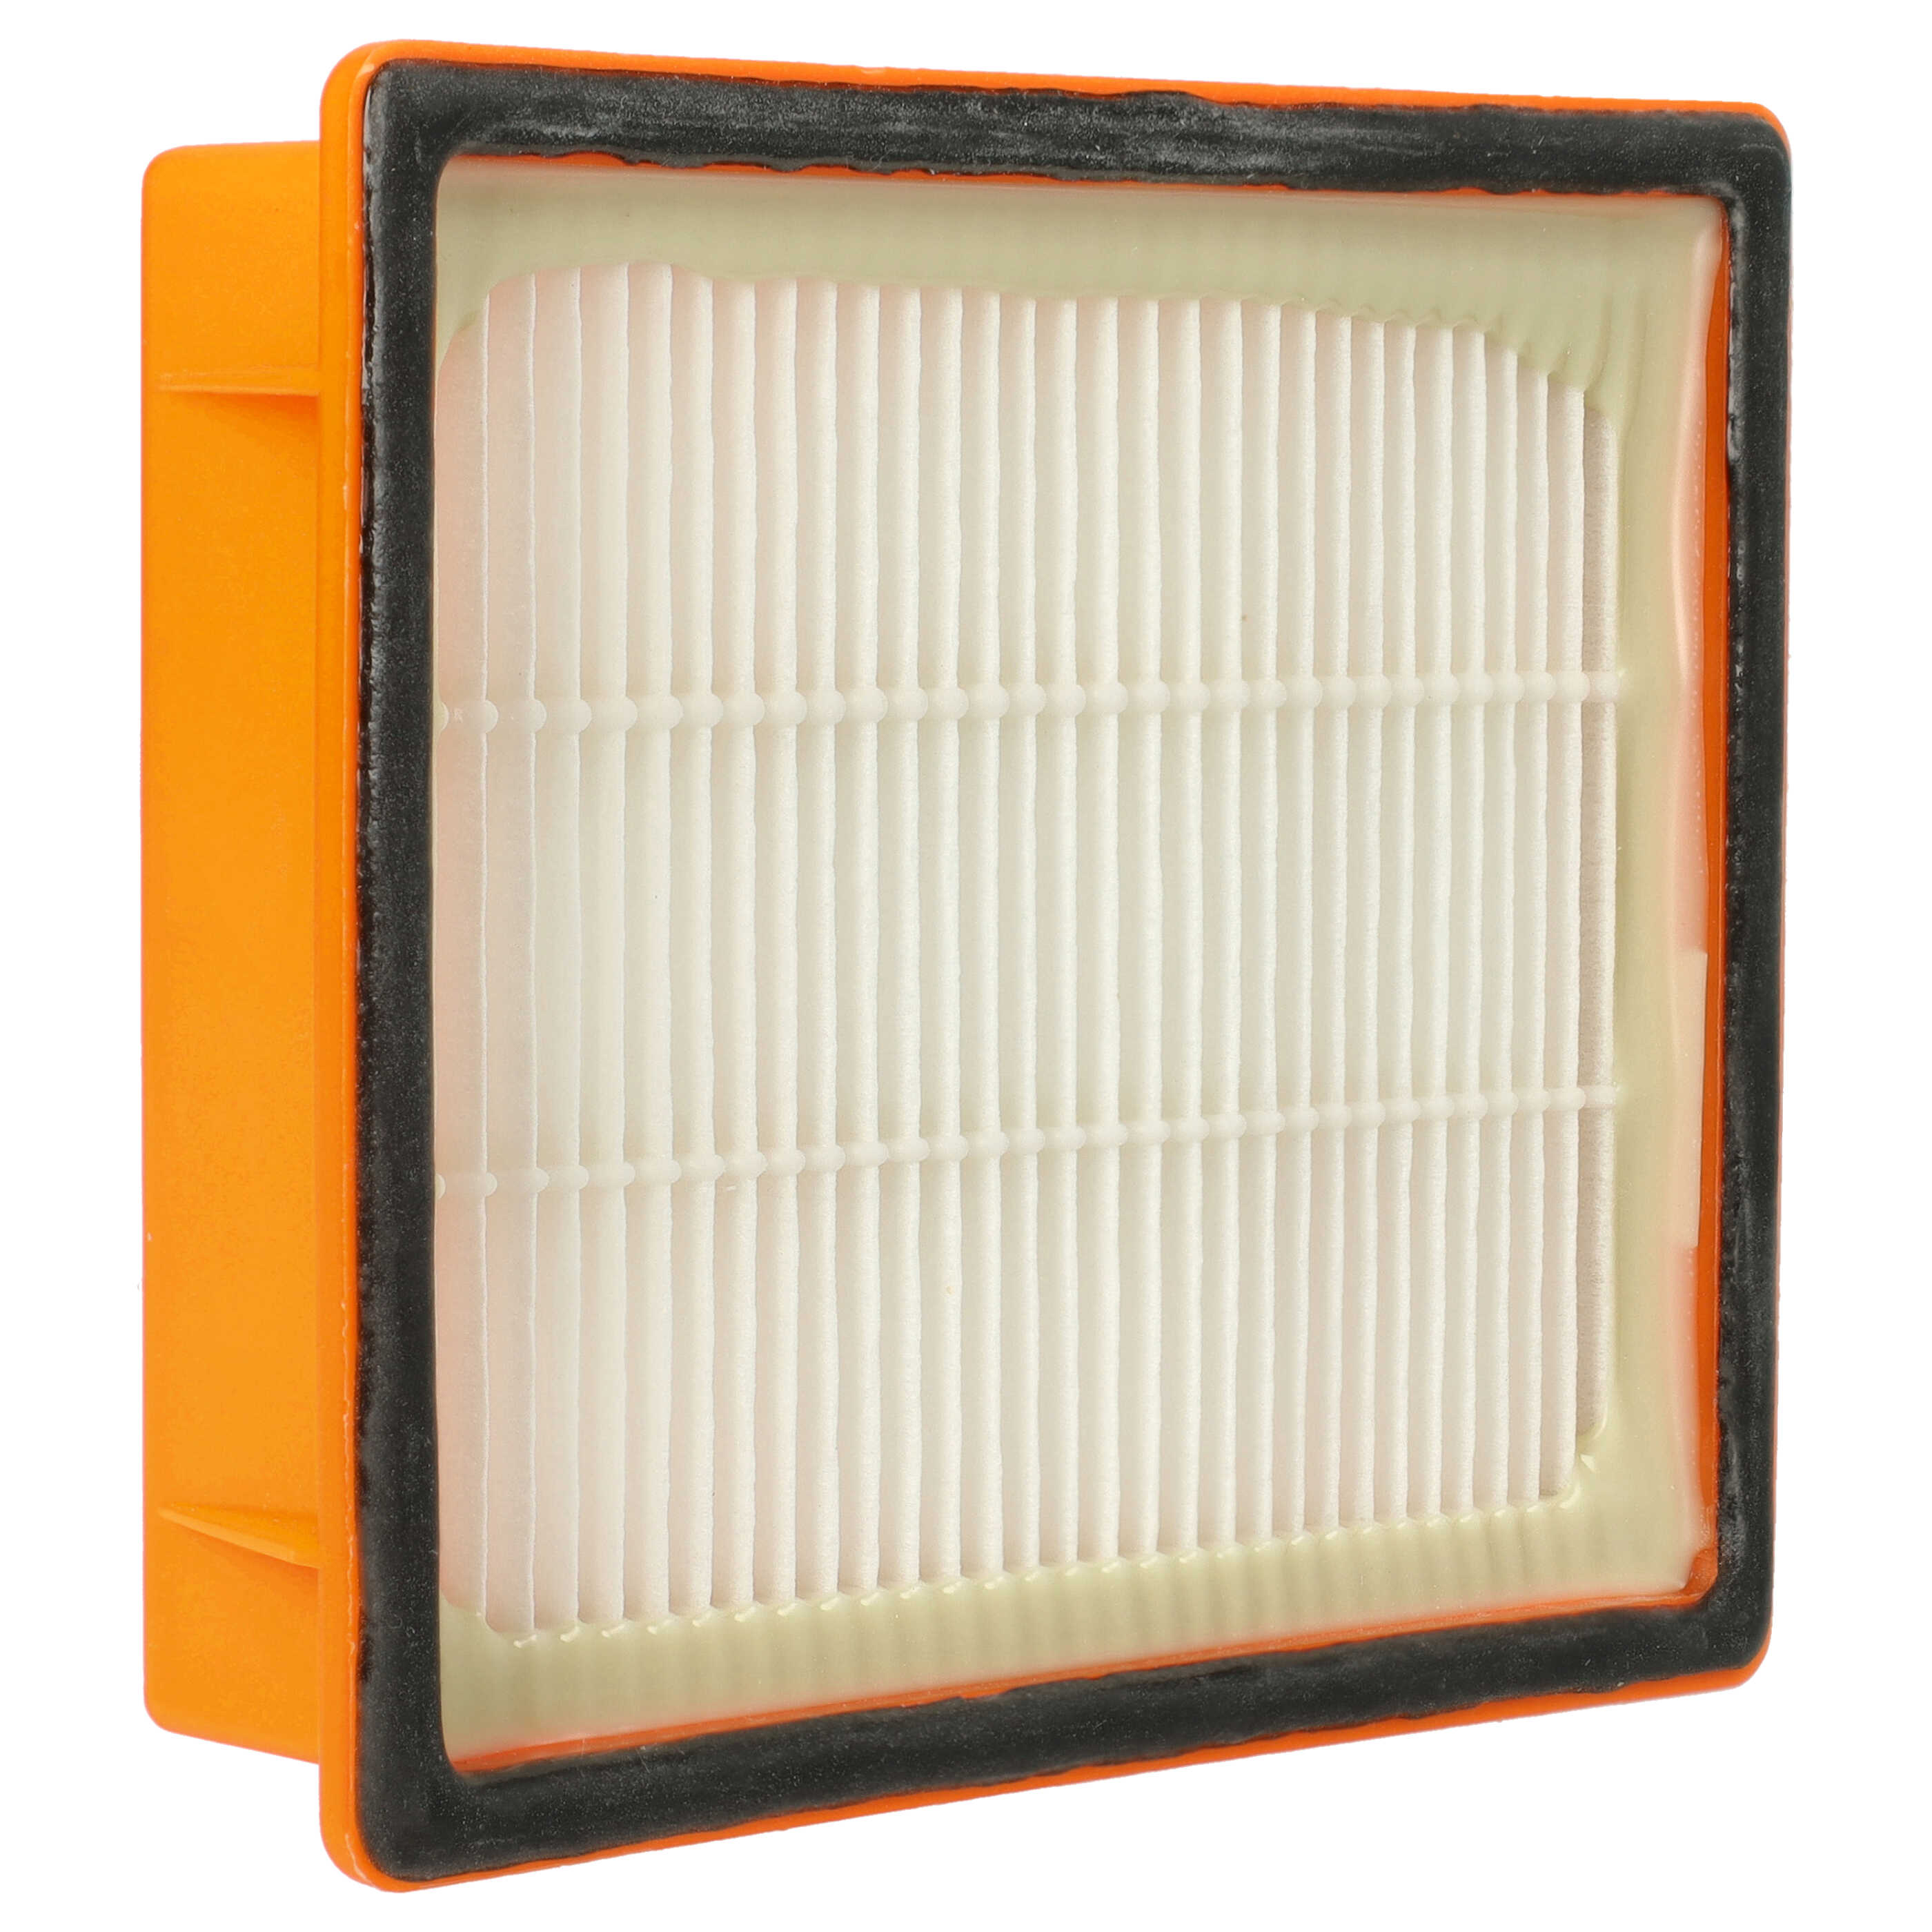 1x HEPA filter replaces AEG AEF 139 for ElectroluxVacuum Cleaner